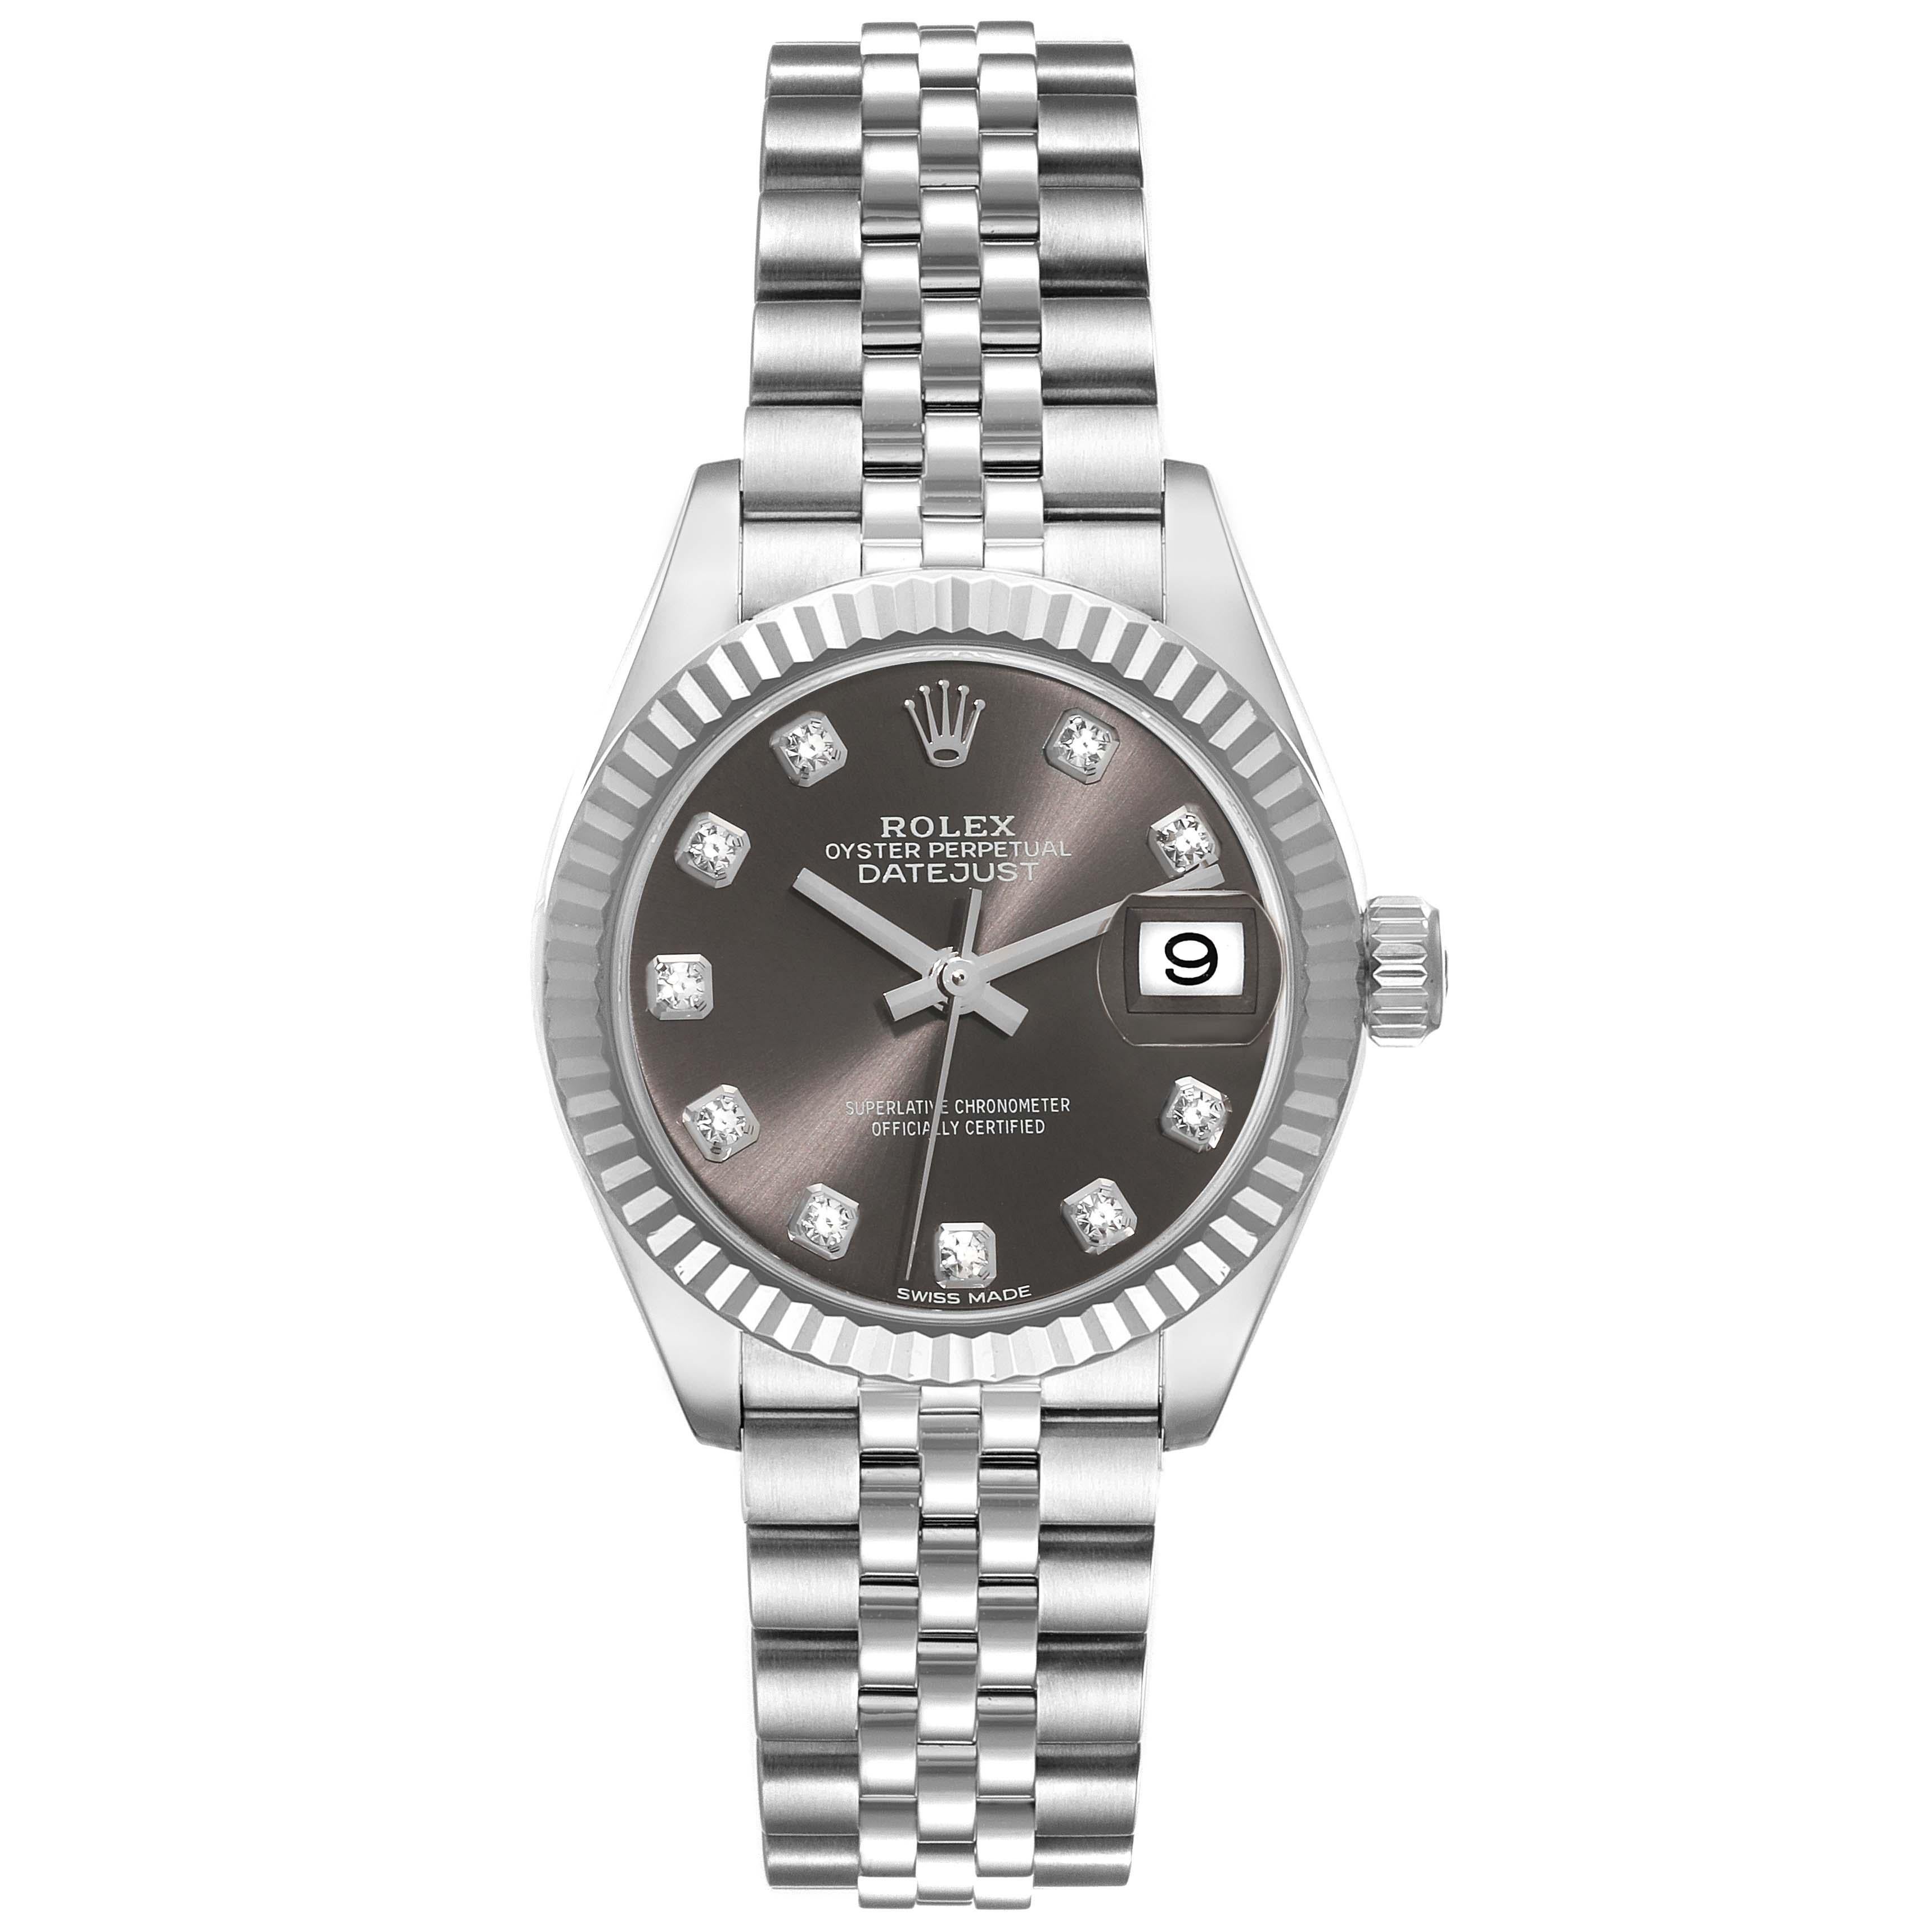 Rolex Datejust 28 Steel White Gold Dark Grey Diamond Dial Ladies Watch 279174. Officially certified chronometer automatic self-winding movement. Stainless steel oyster case 28.0 mm in diameter. Rolex logo on the crown. 18K white gold fluted bezel.